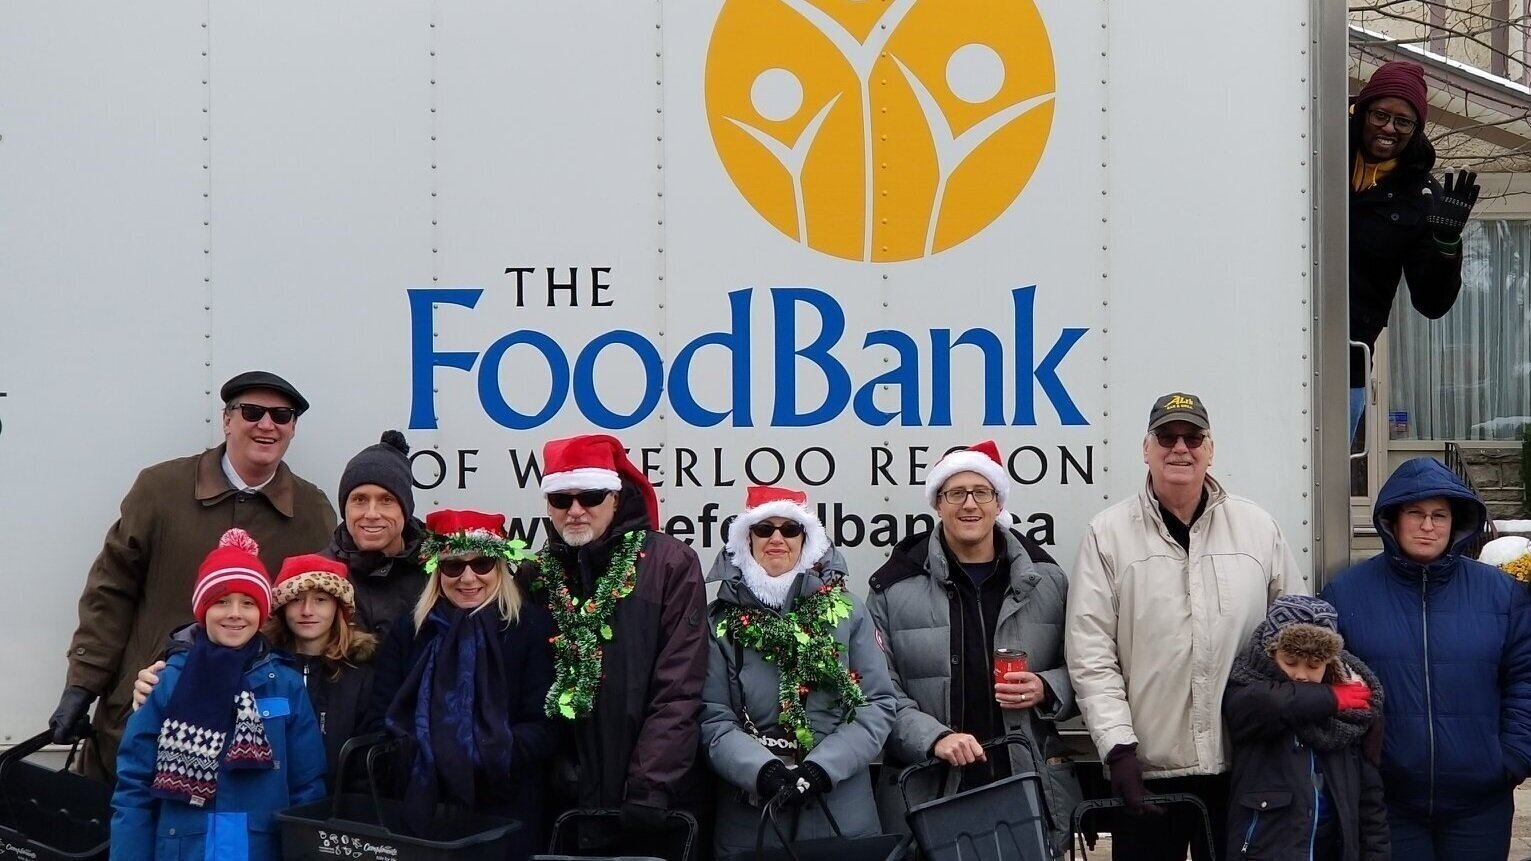 Co-ordinating food bank collection volunteers for the Lions Club Santa Claus Parade